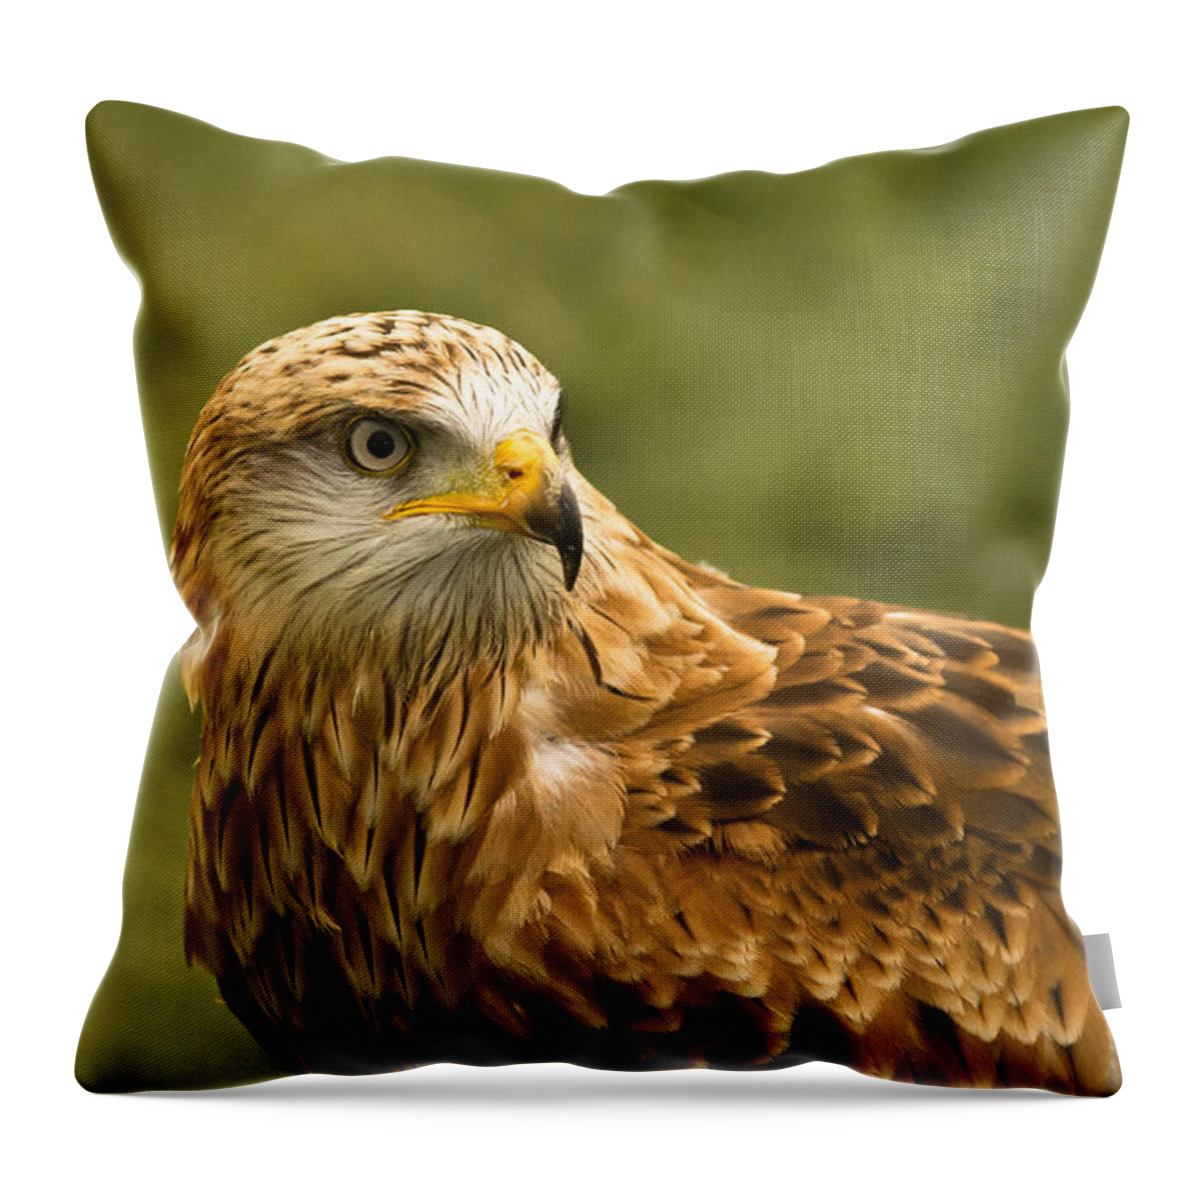 Red Kite Throw Pillow featuring the photograph Red Kite by Scott Carruthers